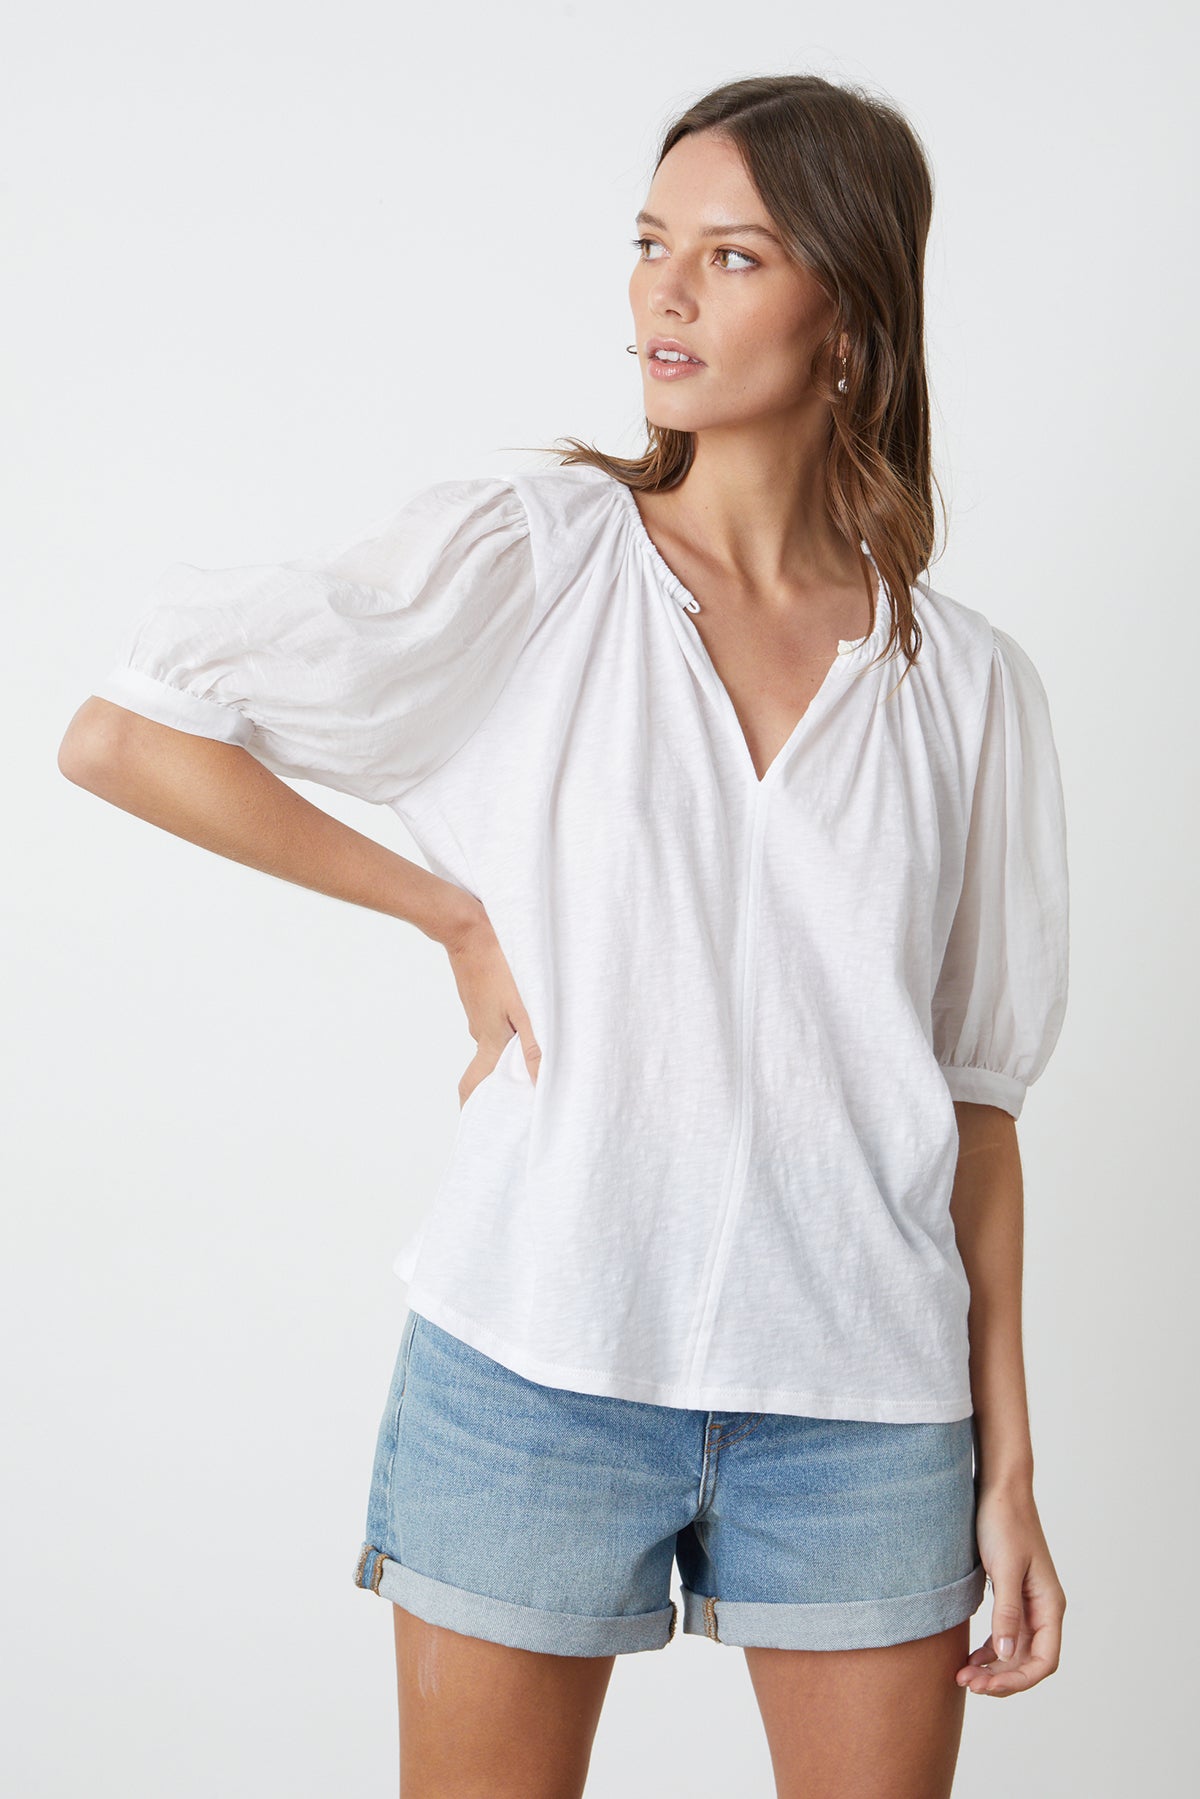   Mallory Top in white with puff sleeves paired with blue denim shorts front 